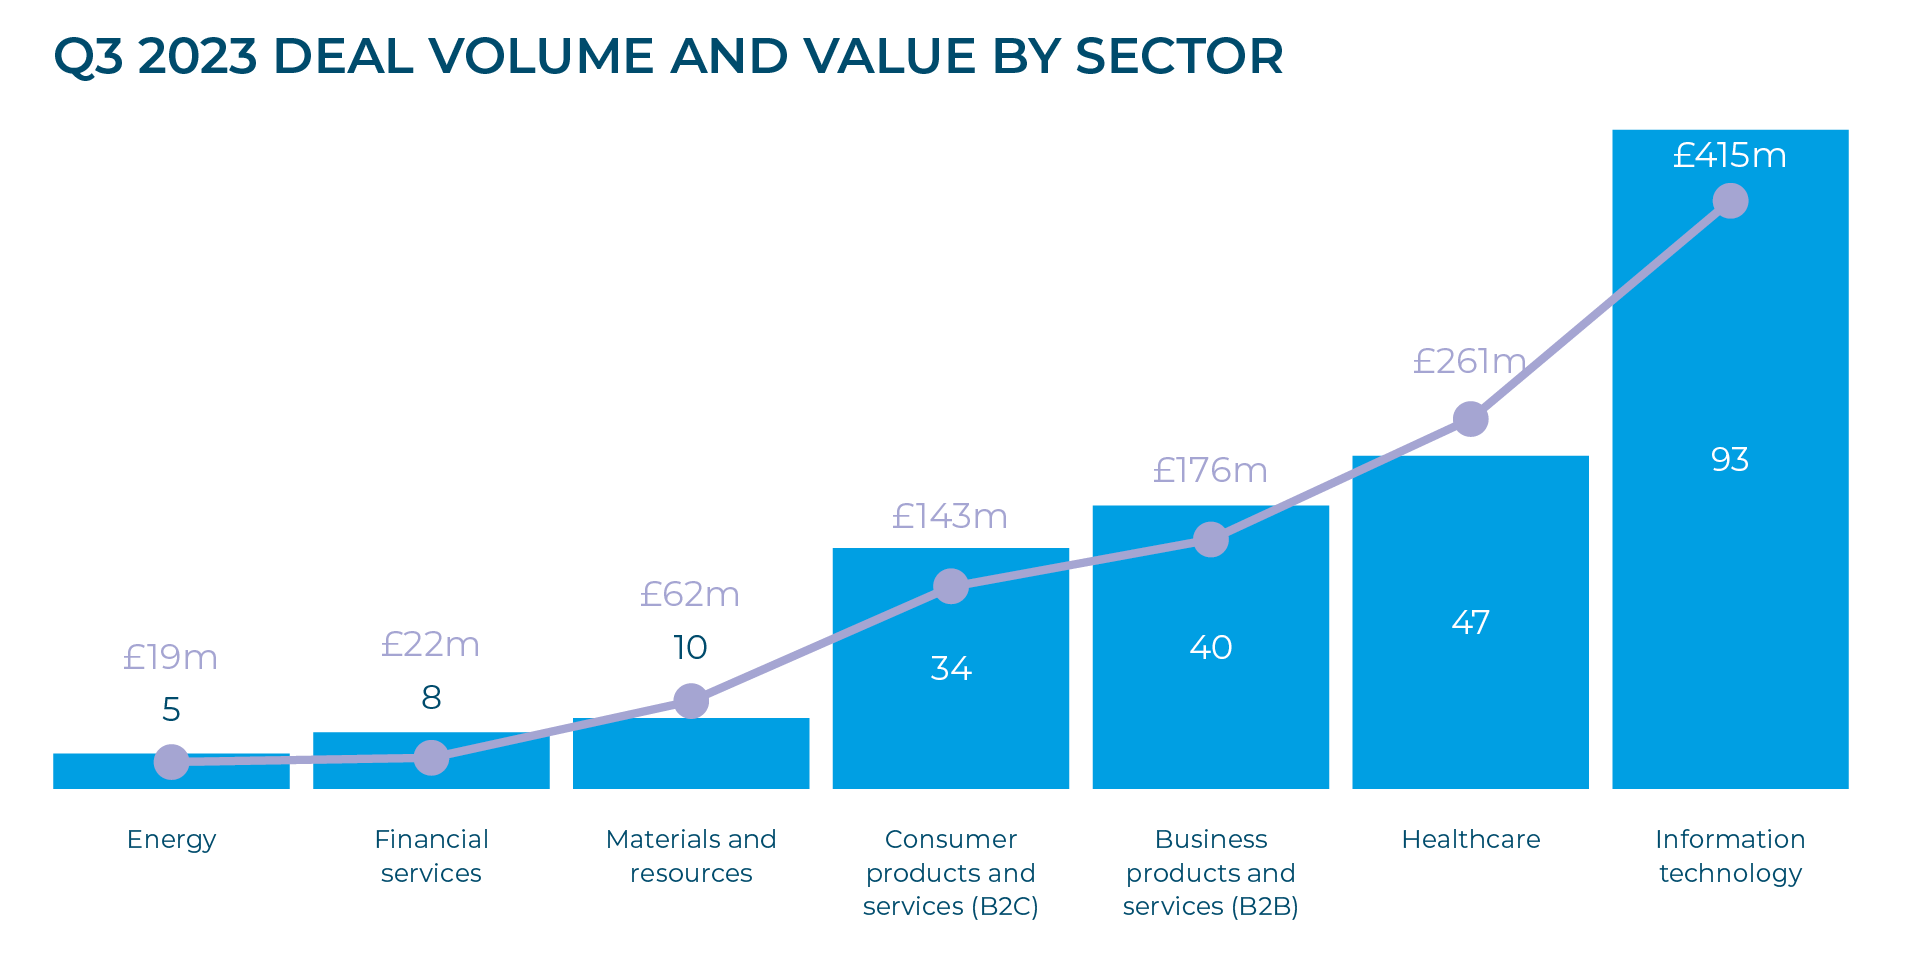 Q3 2023 DEAL VOLUME AND VALUE BY SECTOR Q3 2023 Graphs A3